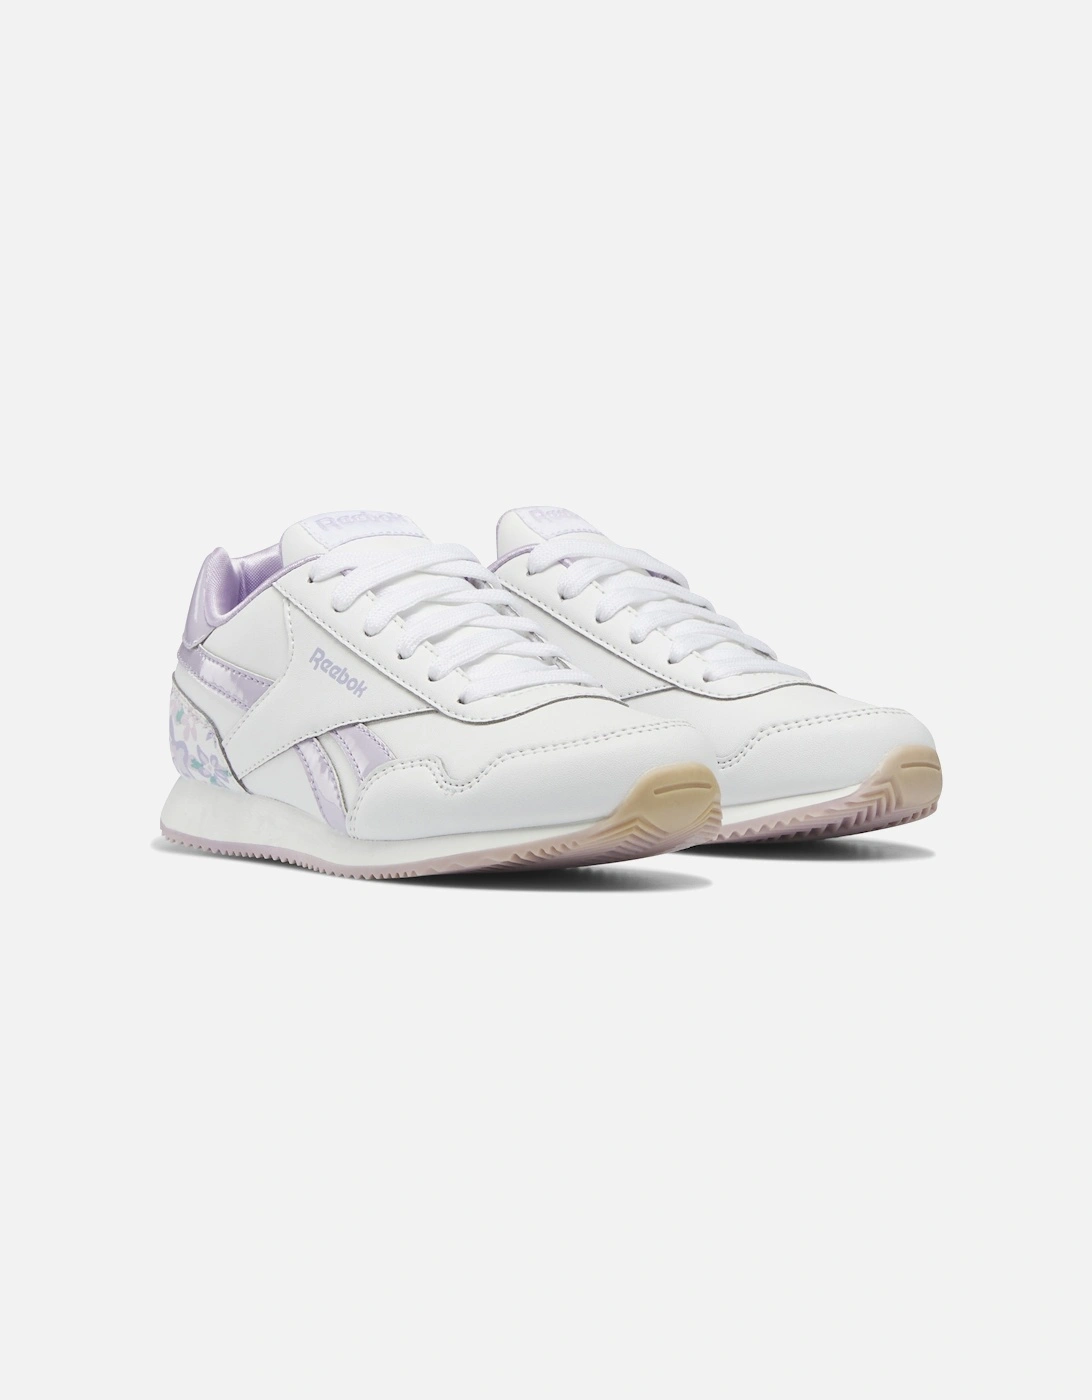 Youths Royal Classic Jog Trainers (White/Lilac)